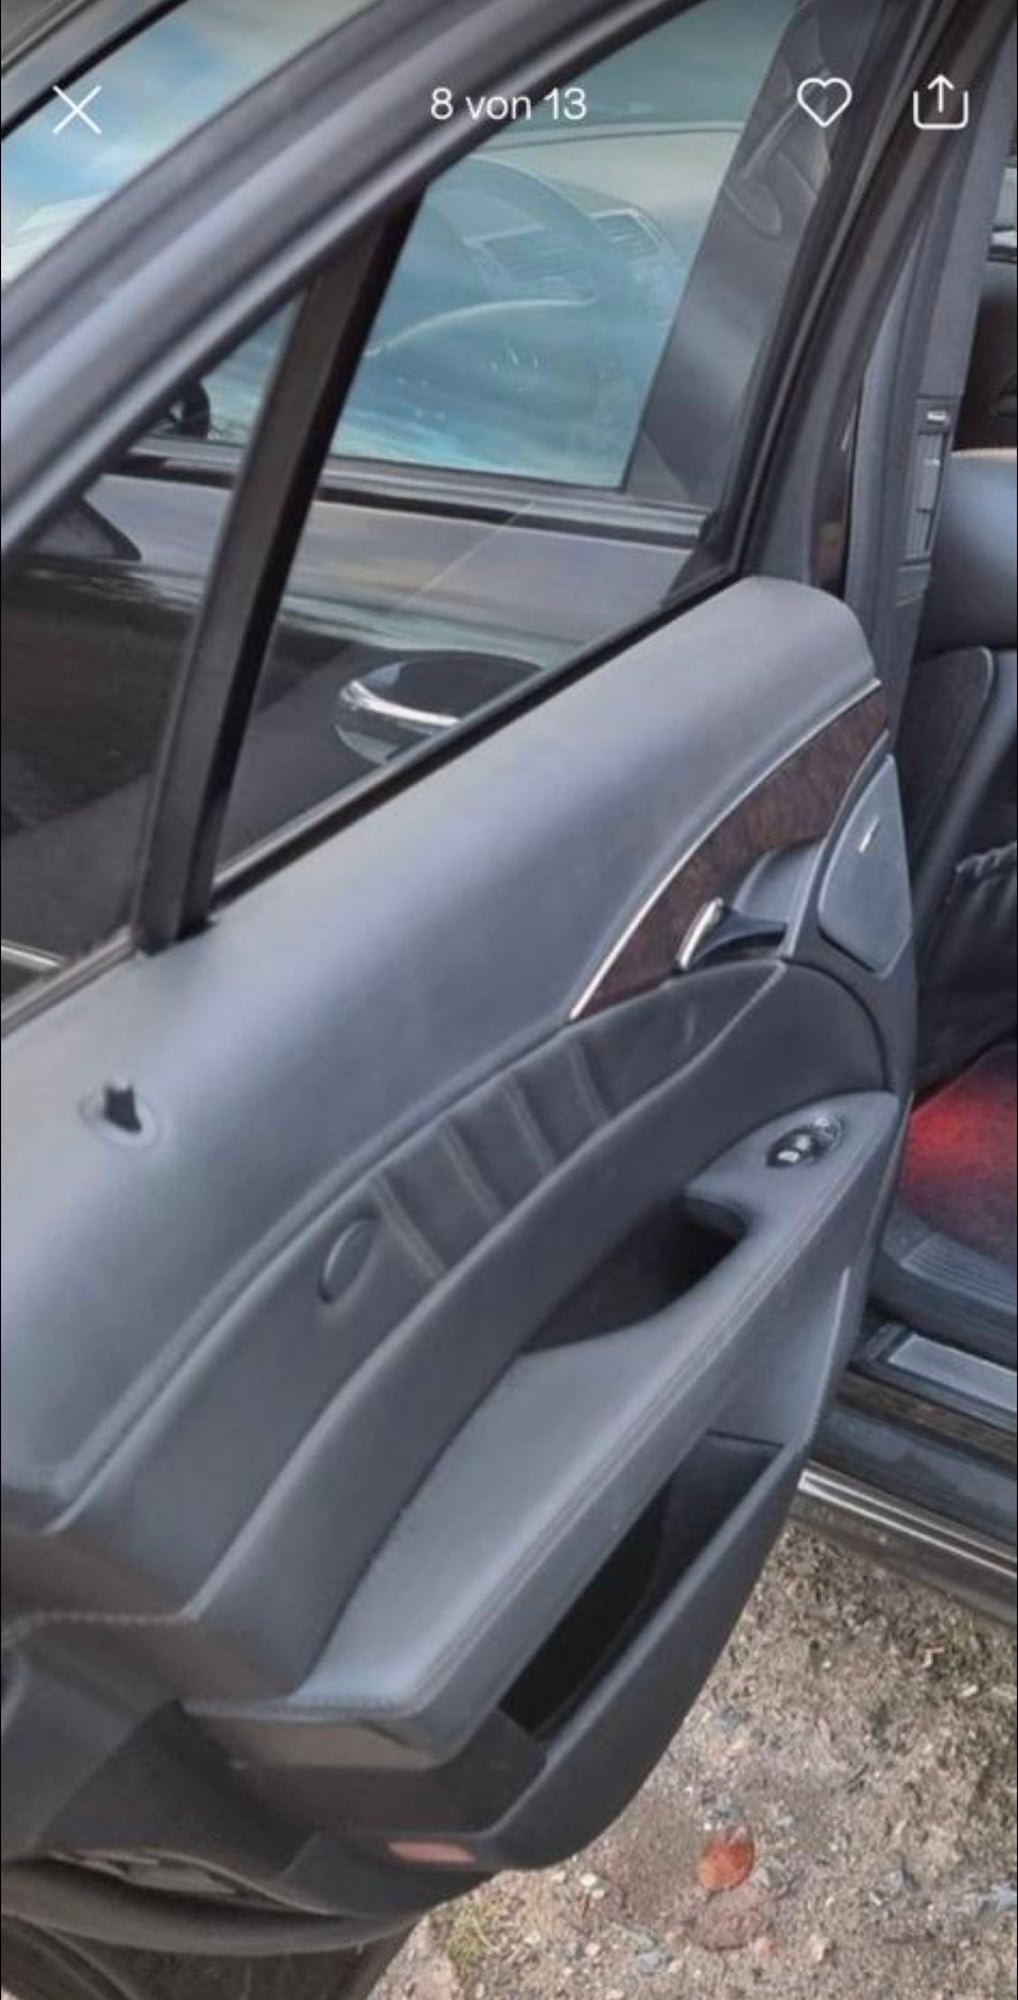 Interior/Upholstery - WTB DOOR PANELS TO MERCEDES E W211 - Used - 0  All Models - Glandale, CA 91201, United States